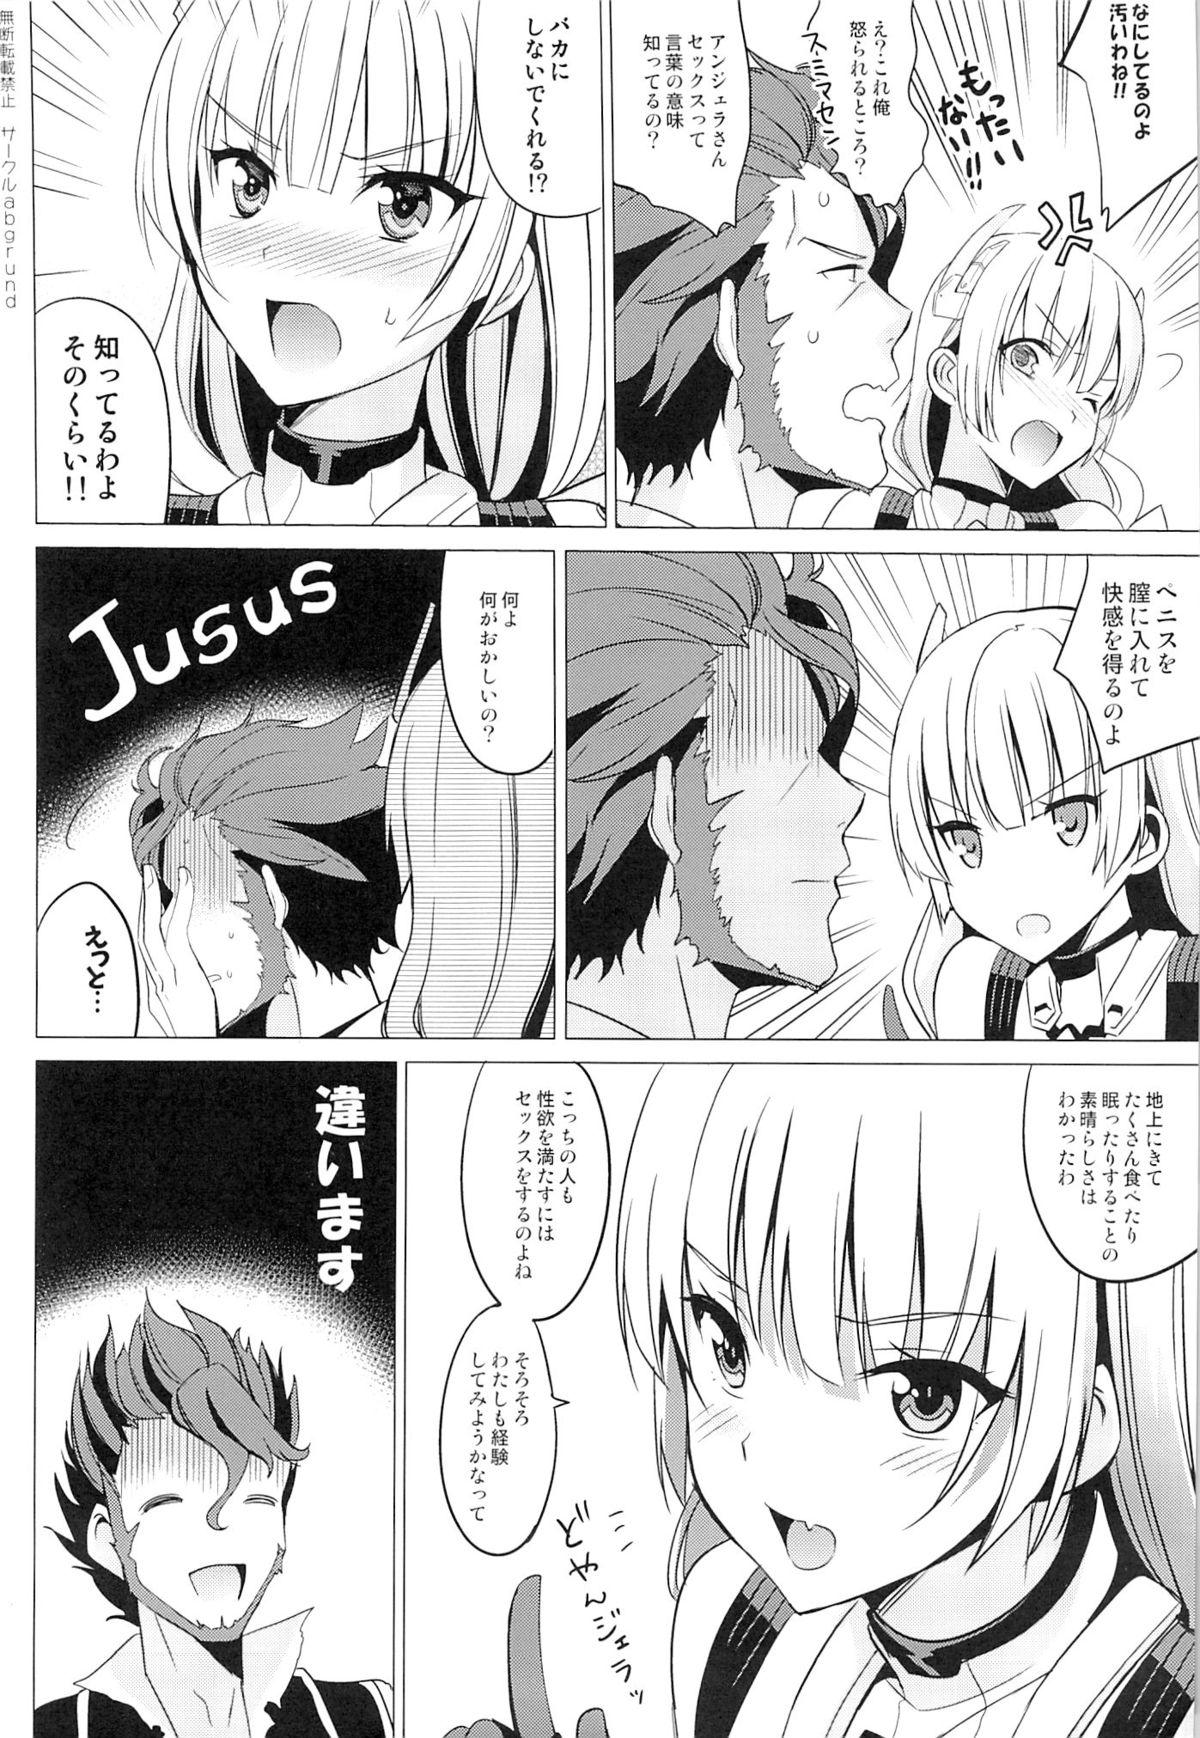 Chicks Rakuen e Youkoso - Expelled from paradise Awesome - Page 3